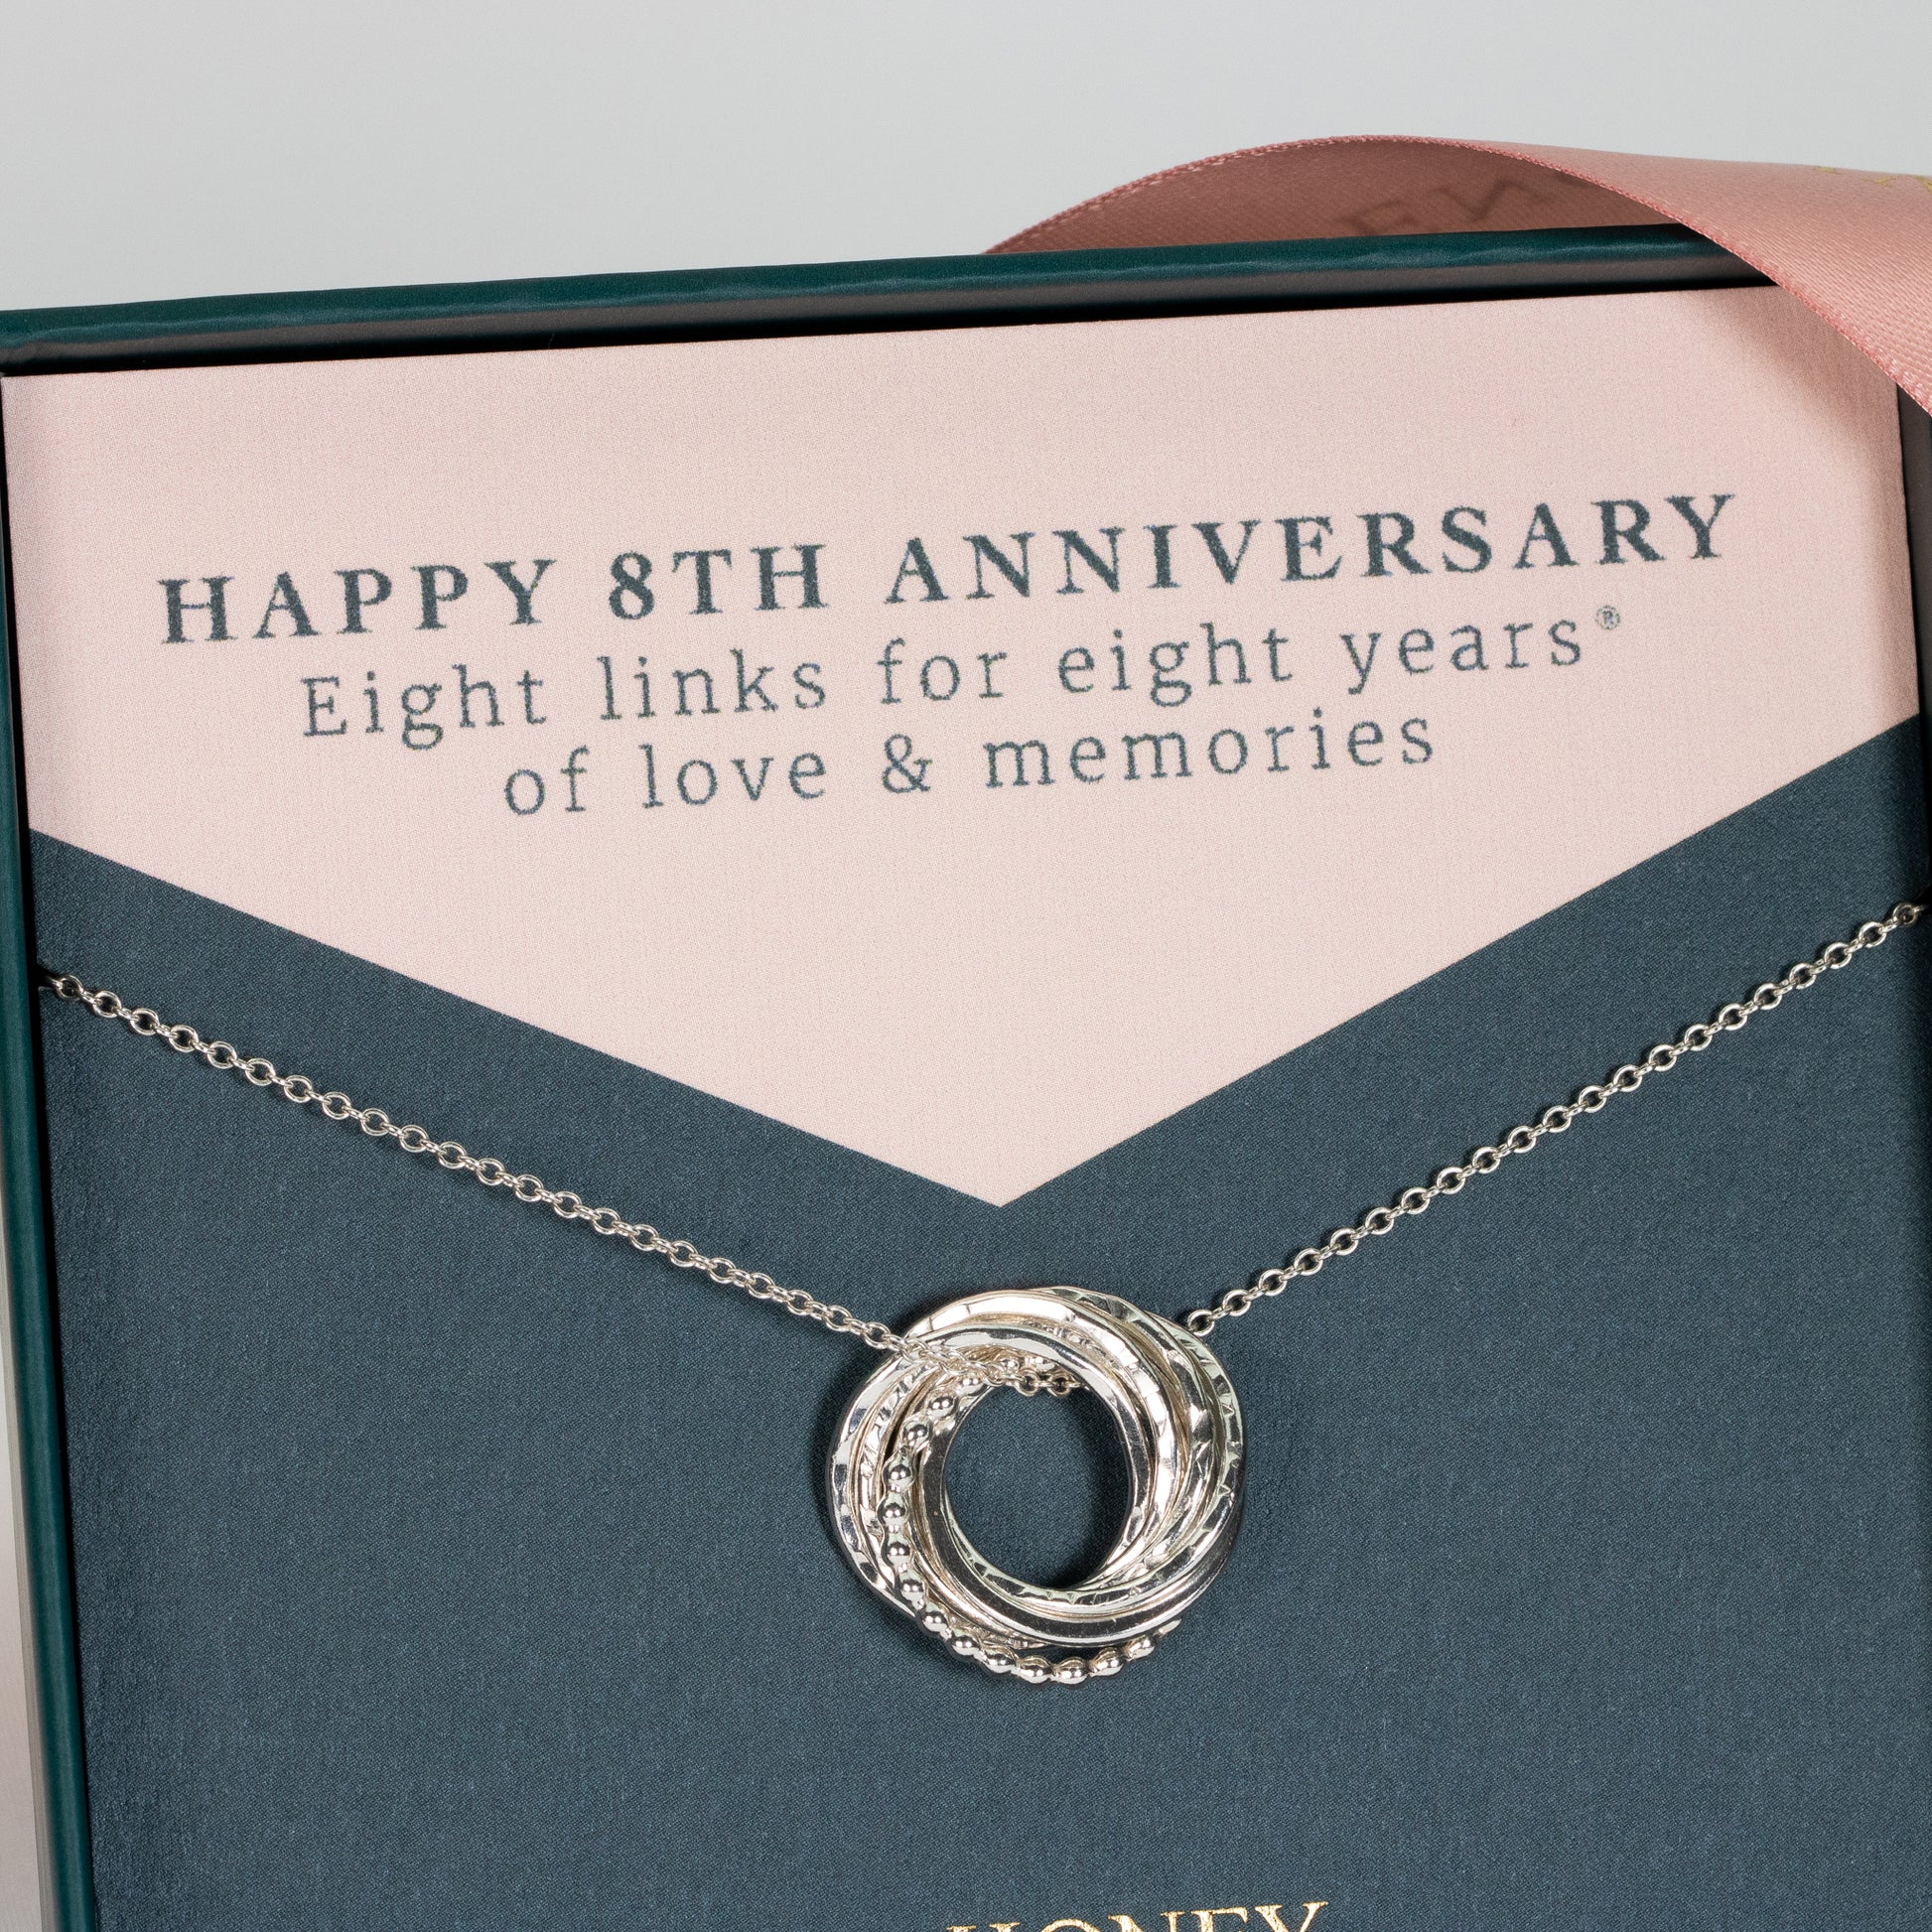 8th Anniversary Necklace - The Original 8 Rings for 8 Years Necklace - Petite Silver